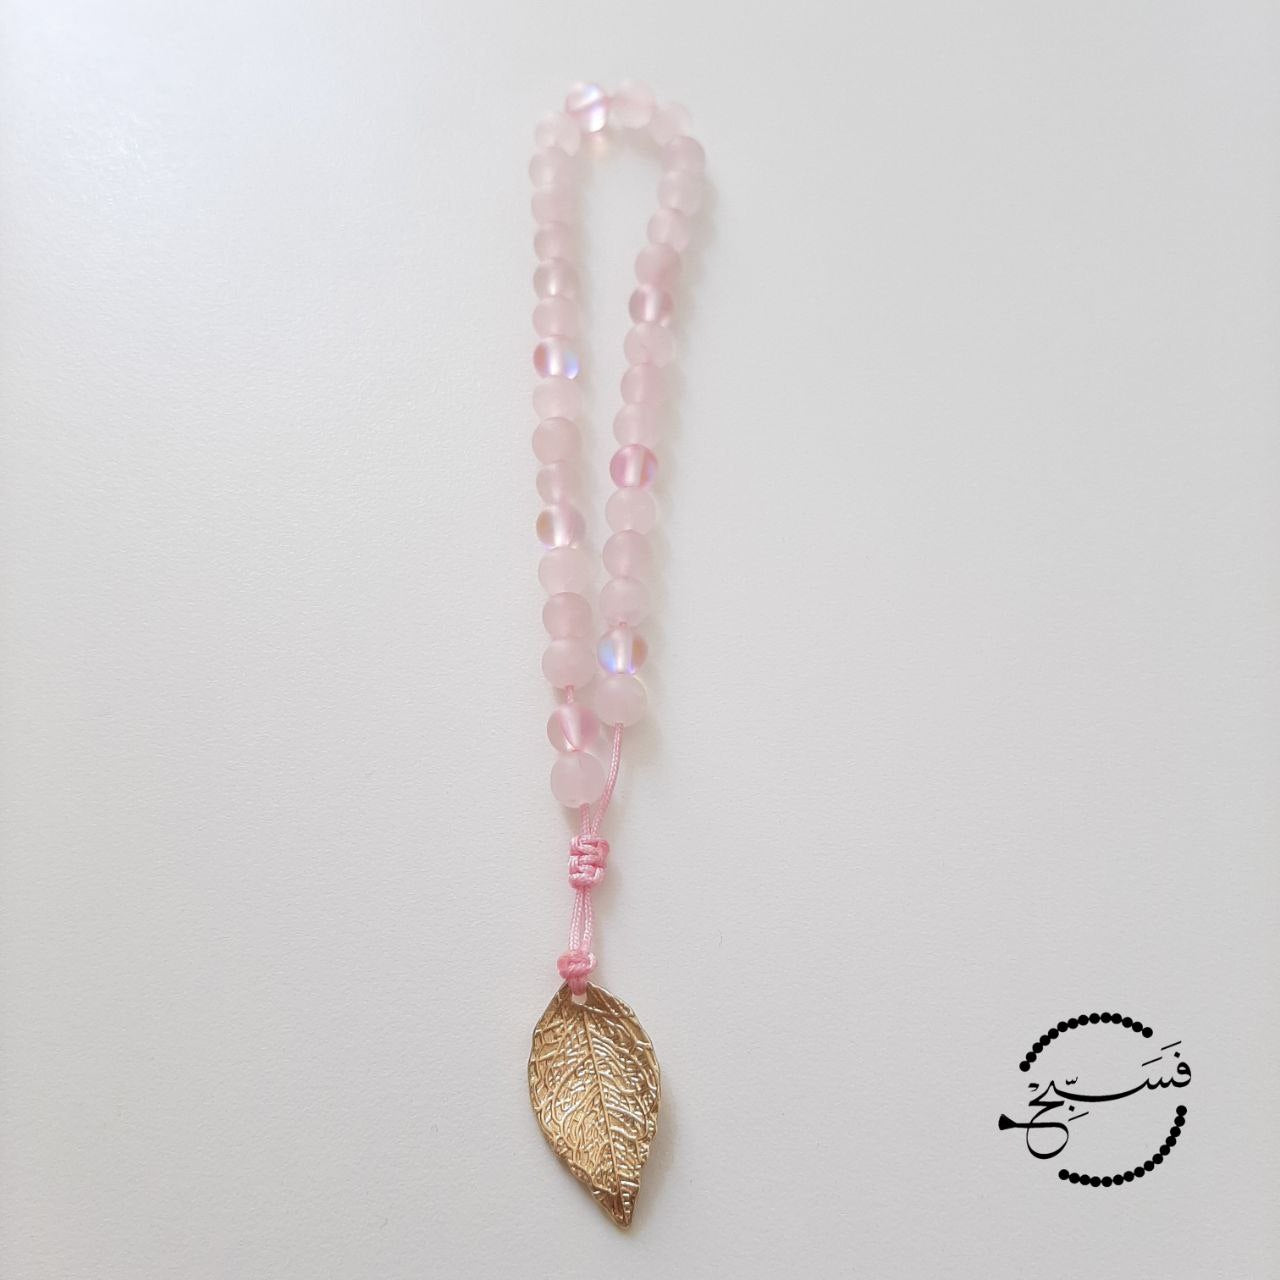 Rose quartz and moonstone beads, with a brass leaf.  Features an adjustable knot.  33 beads (6mm beads)